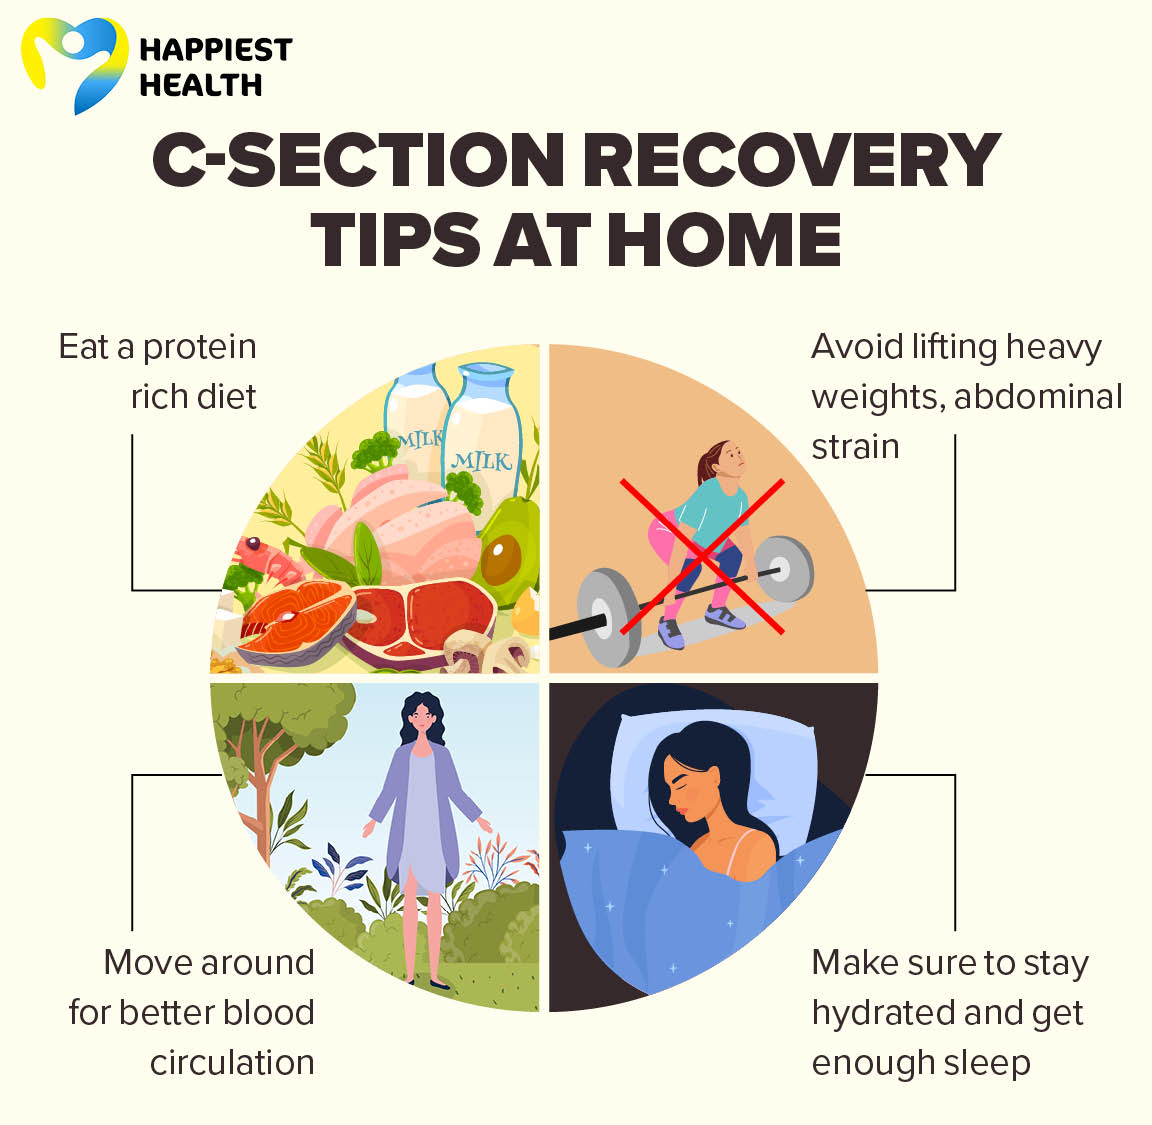 C-section recovery tips at home • Eat a protein rich diet. • Avoid lifting heavy weights or any type of abdominal strain. • Move around for better blood circulation. • Make sure to stay hydrated and get enough sleep. 